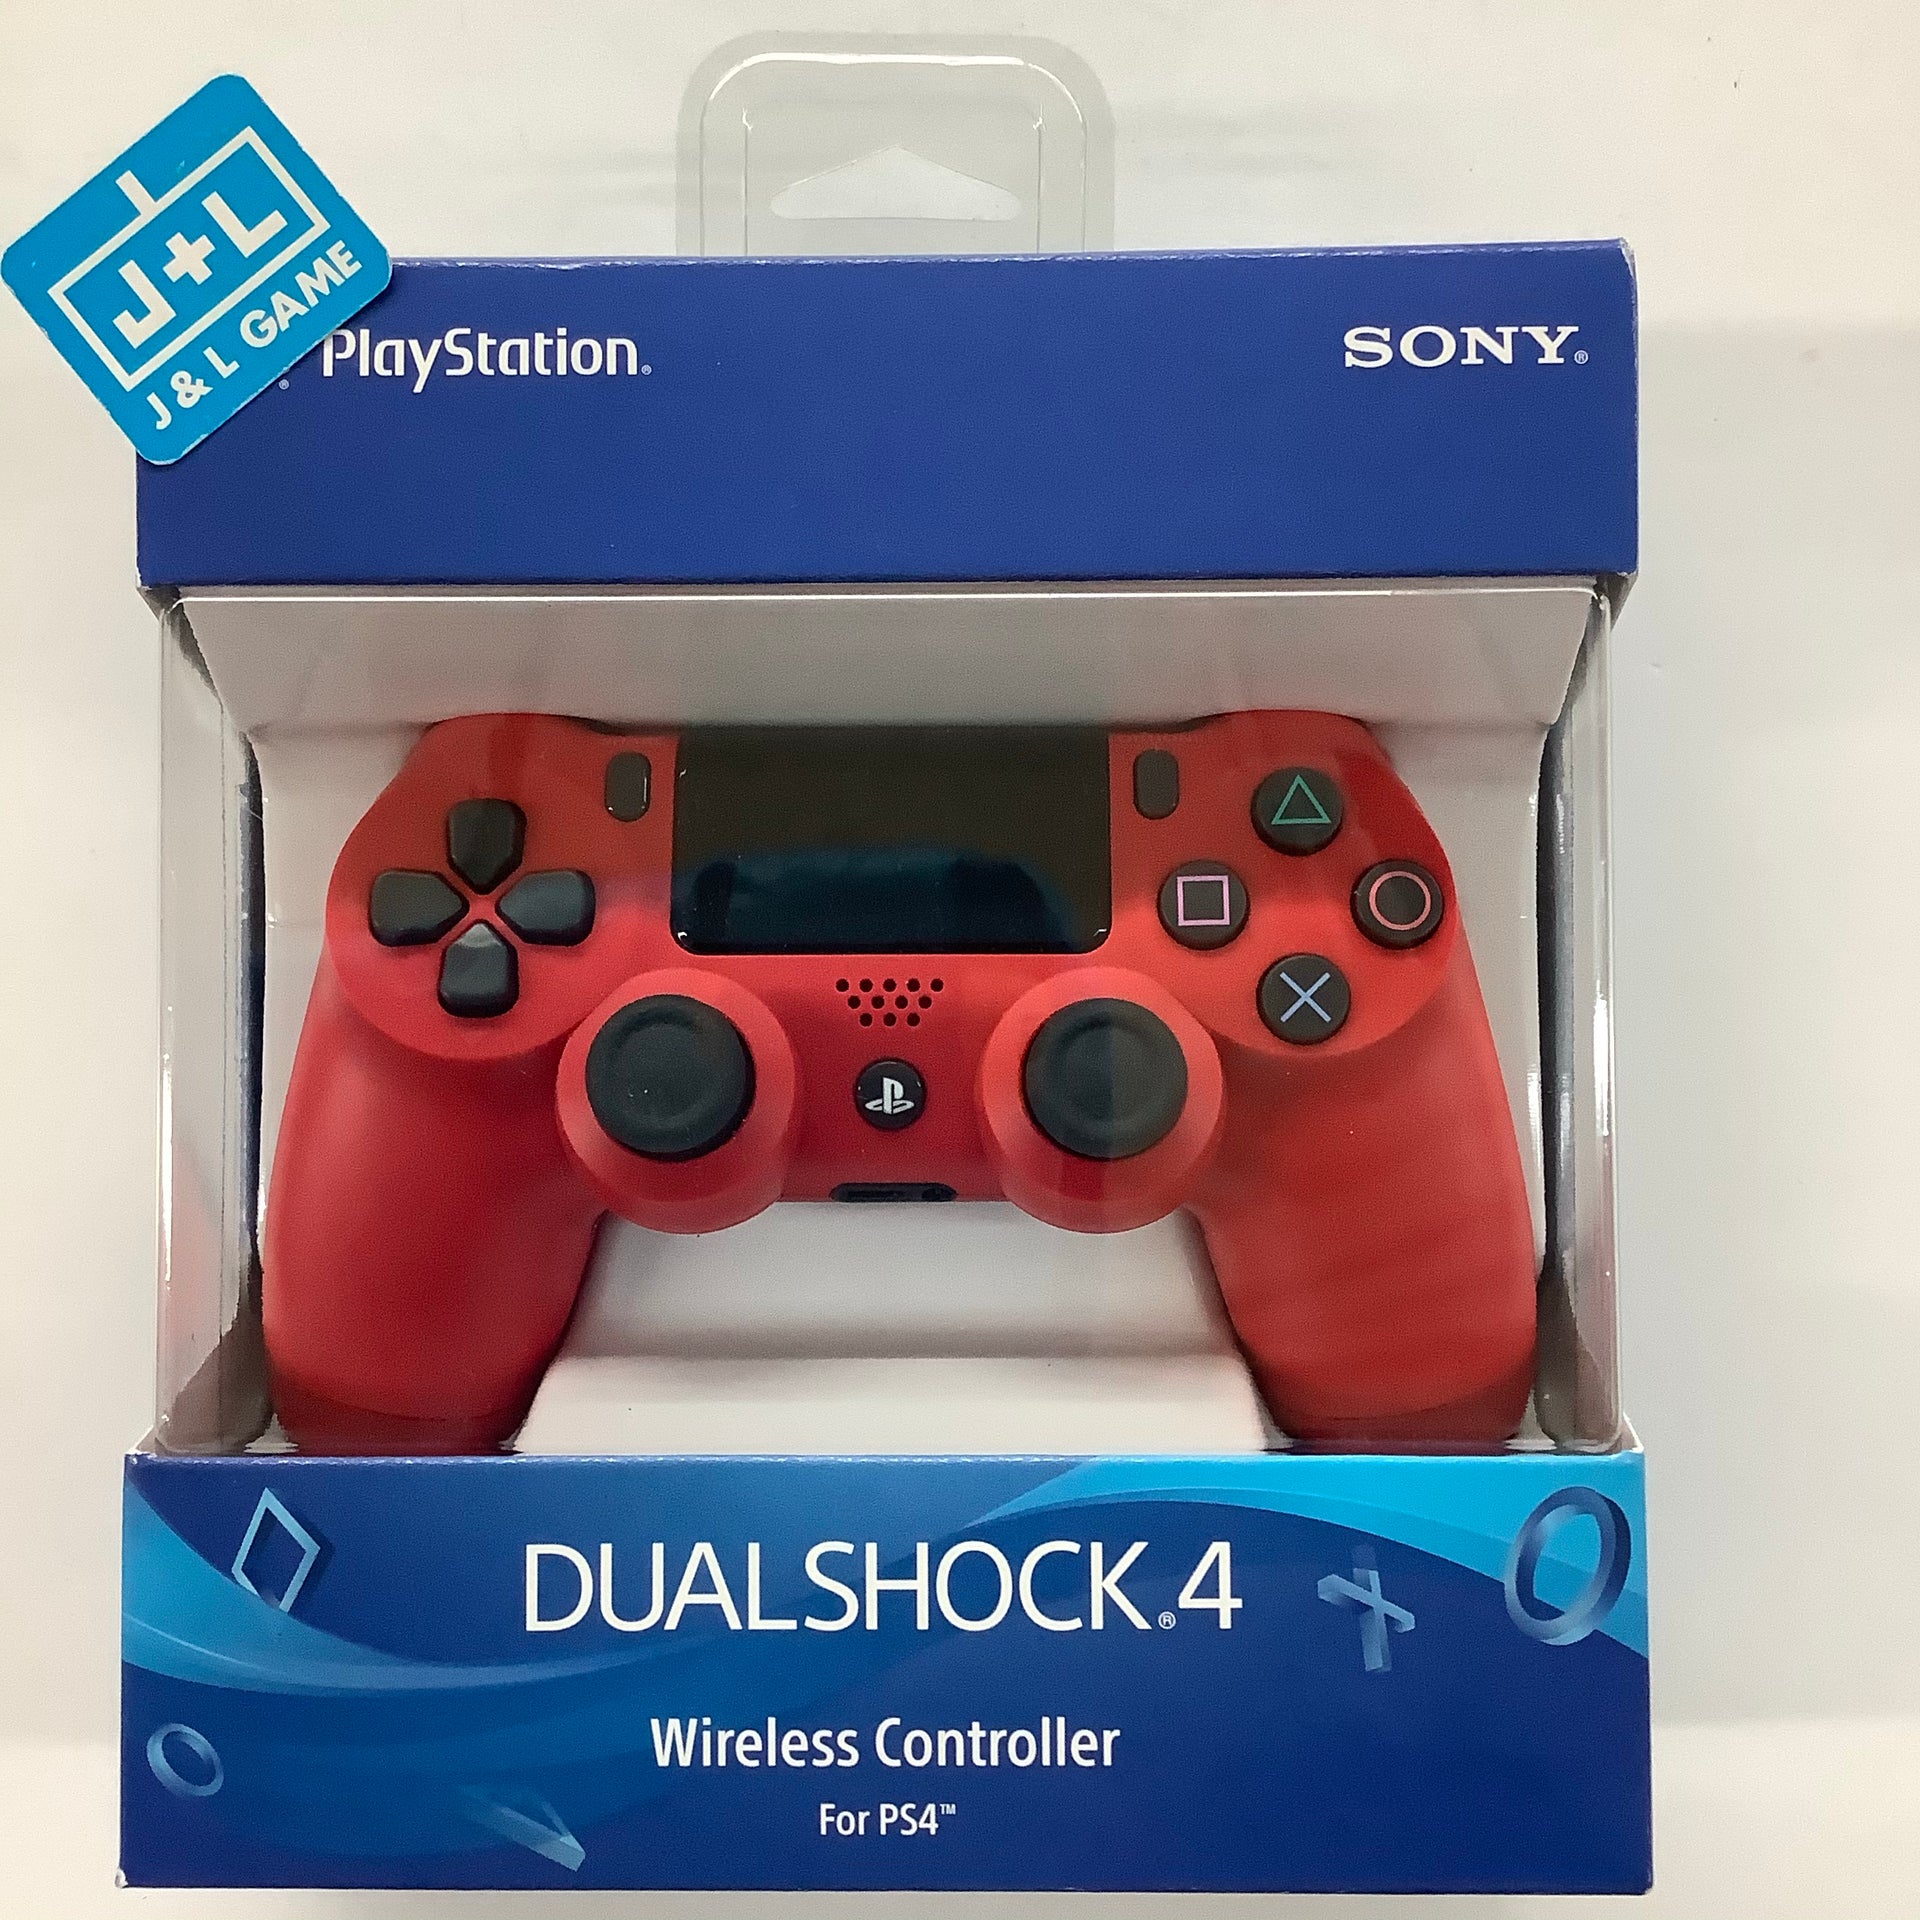 DualShock 4 Wireless Controller for Sony PlayStation 4 Magma (red